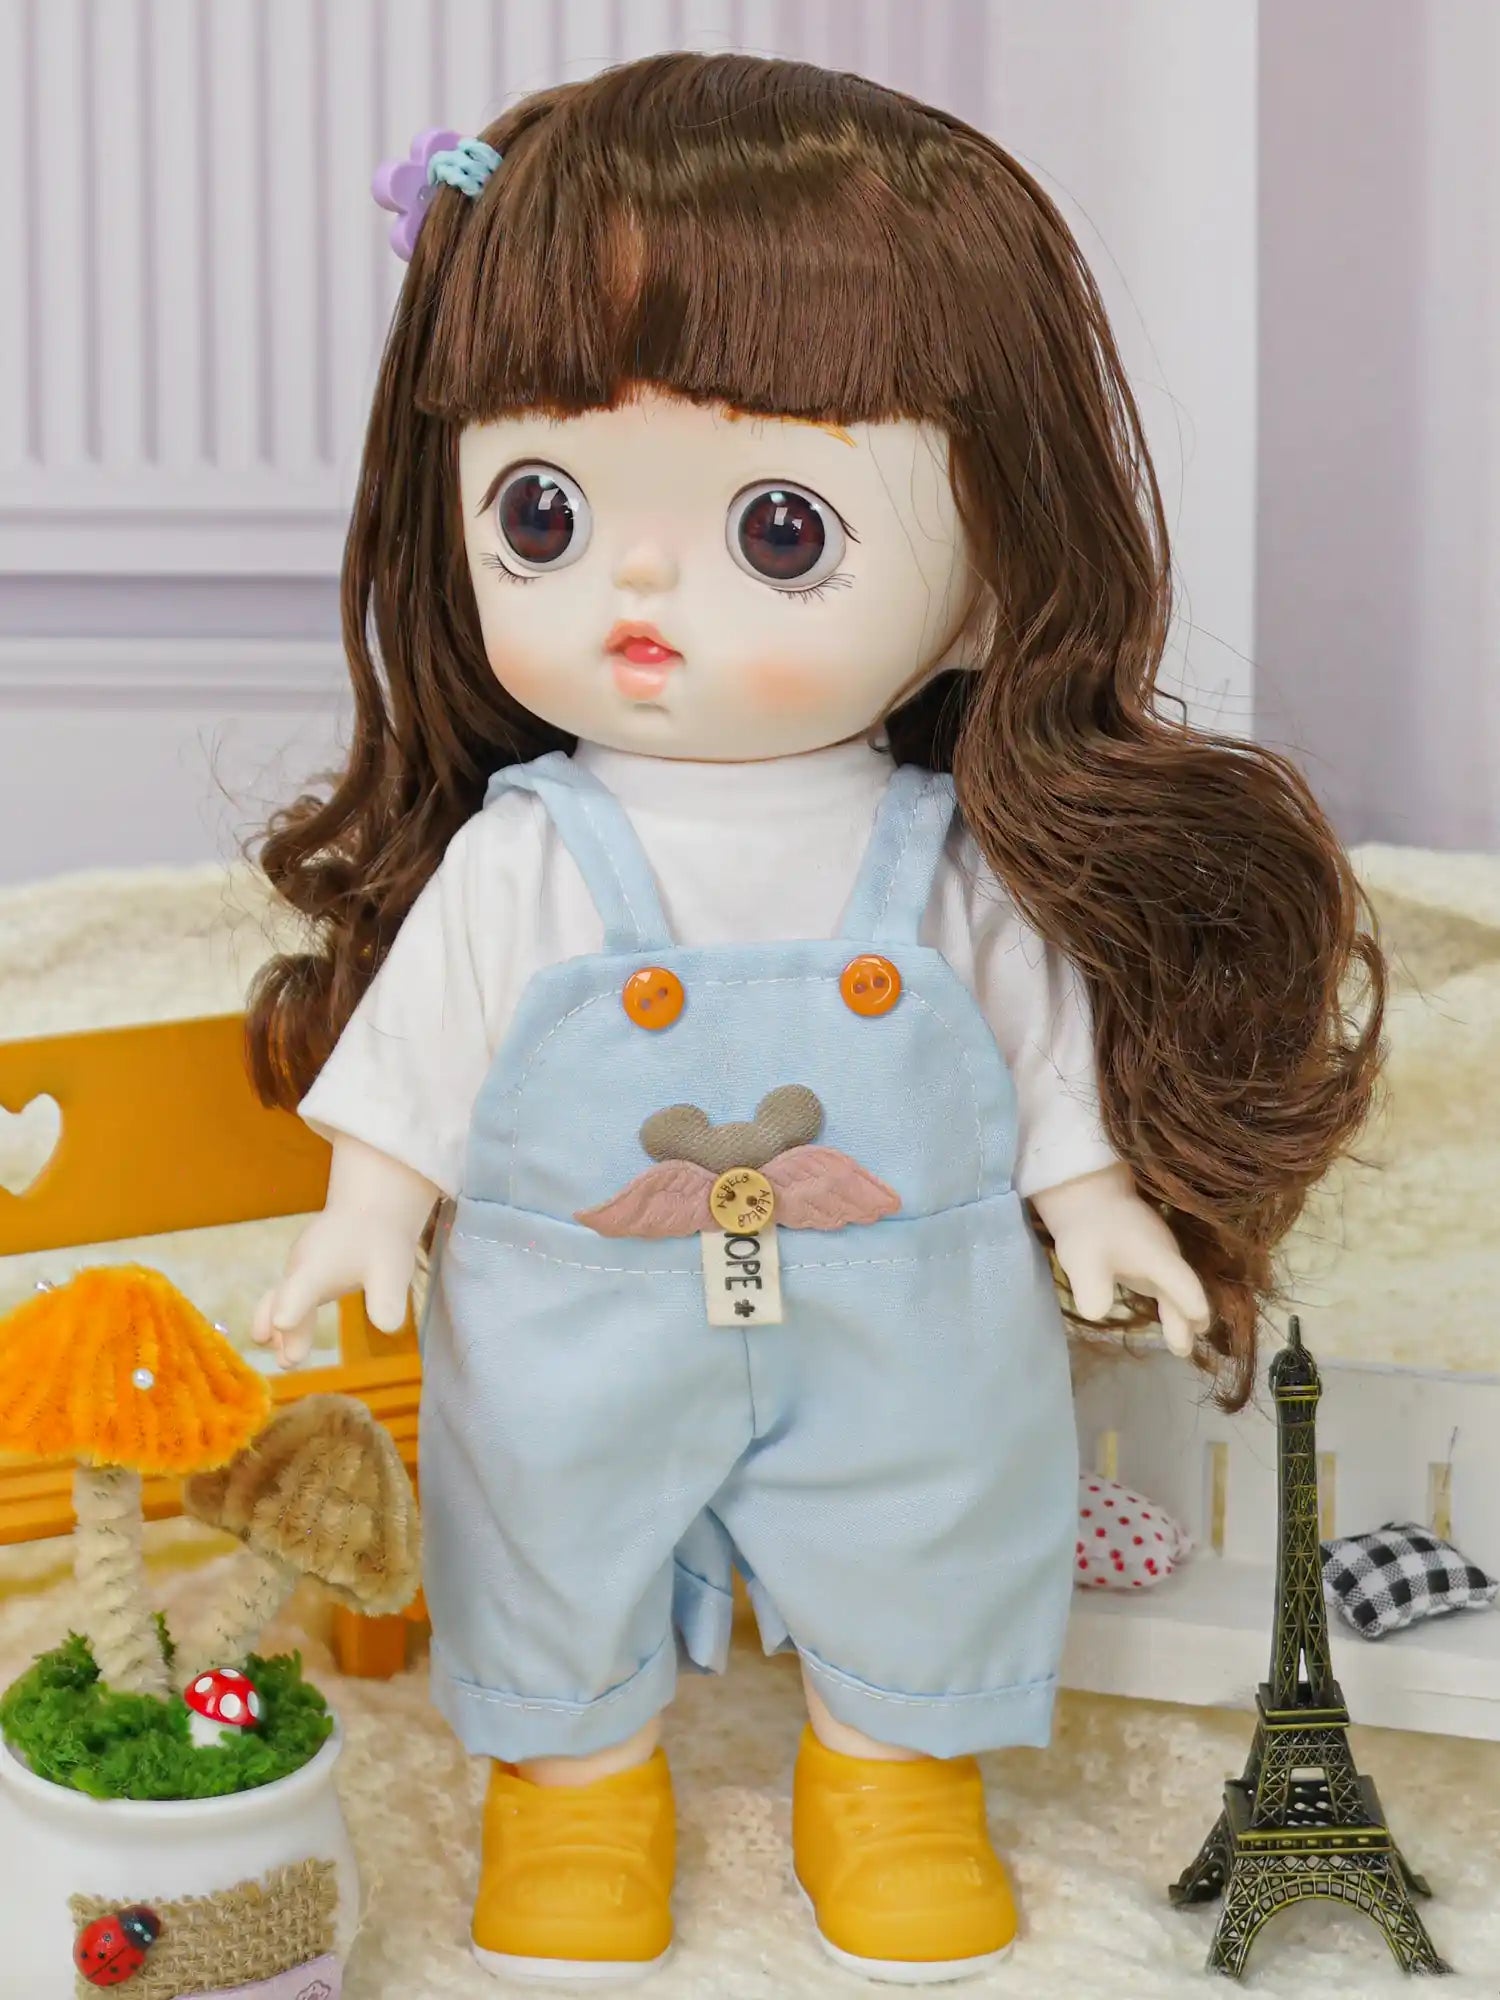 Doll with deep brown eyes and chestnut hair in a blue dungaree with a bear design, beside a miniature Eiffel Tower.